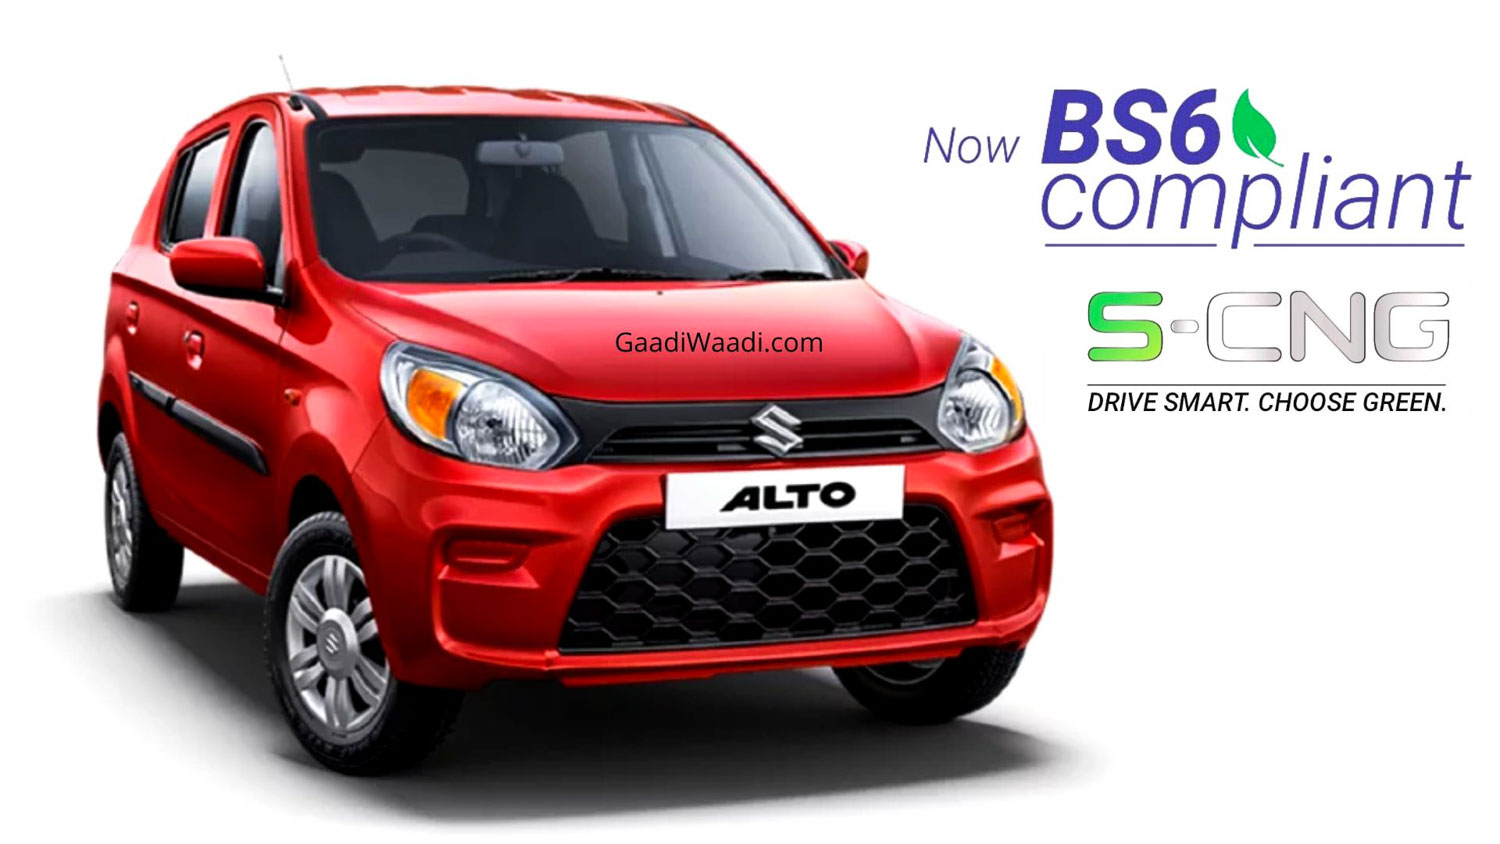 2020 Maruti Suzuki Alto SCNG BS6 Launched In India From Rs. 4.32 Lakh